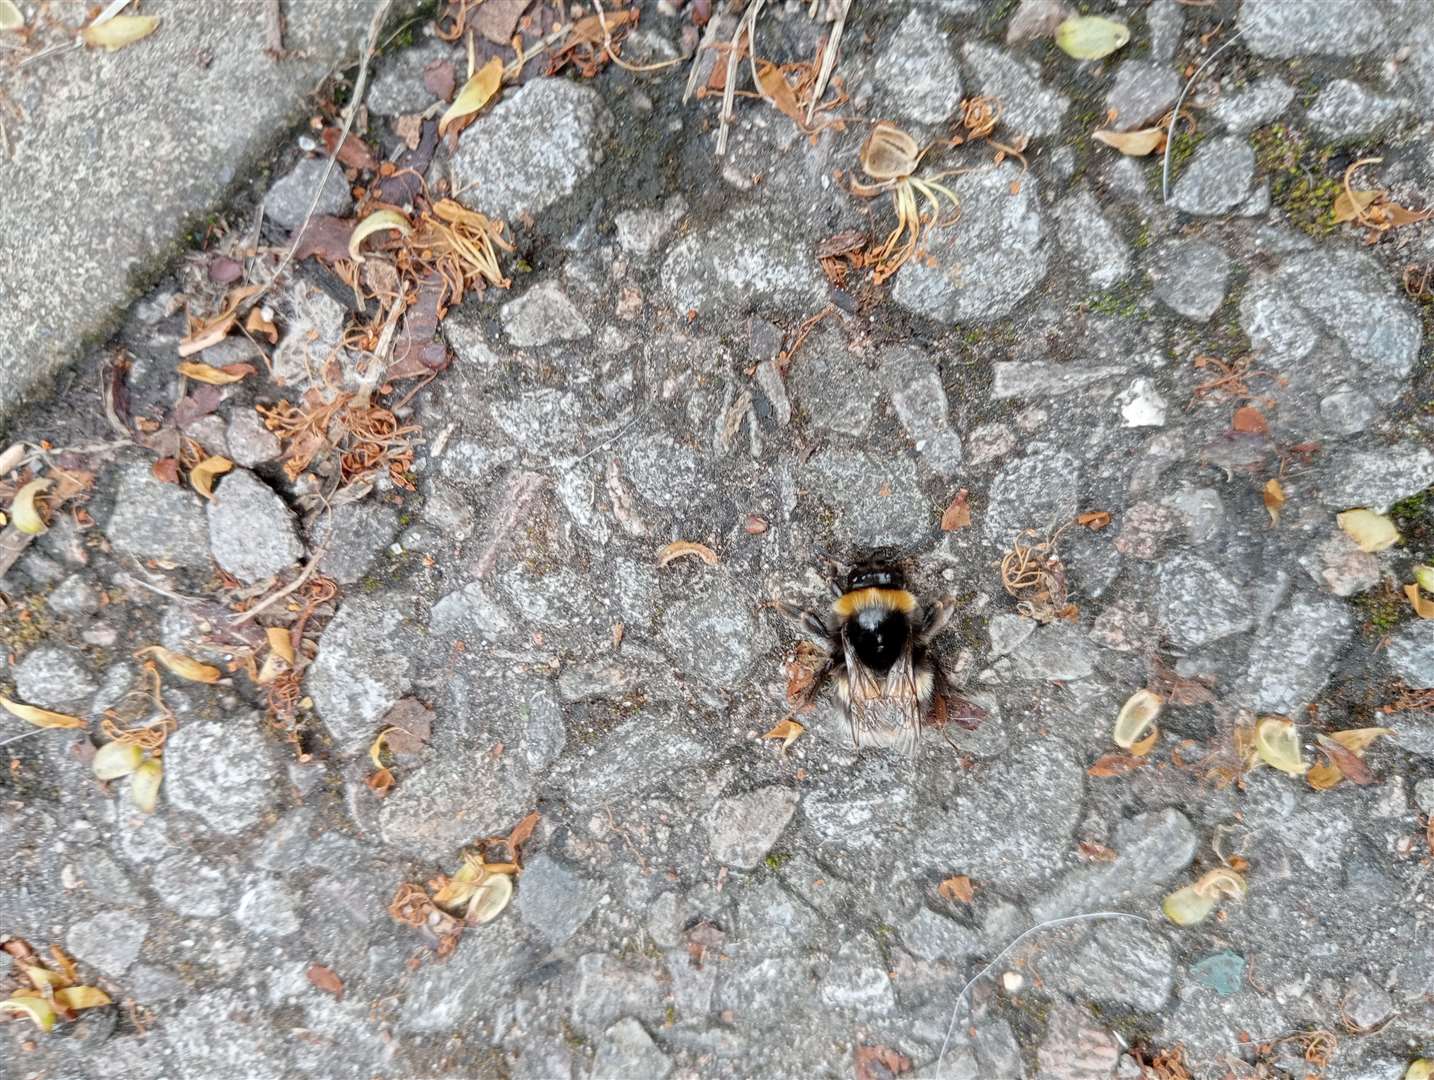 Dead bees have been spotted by the River Ness.